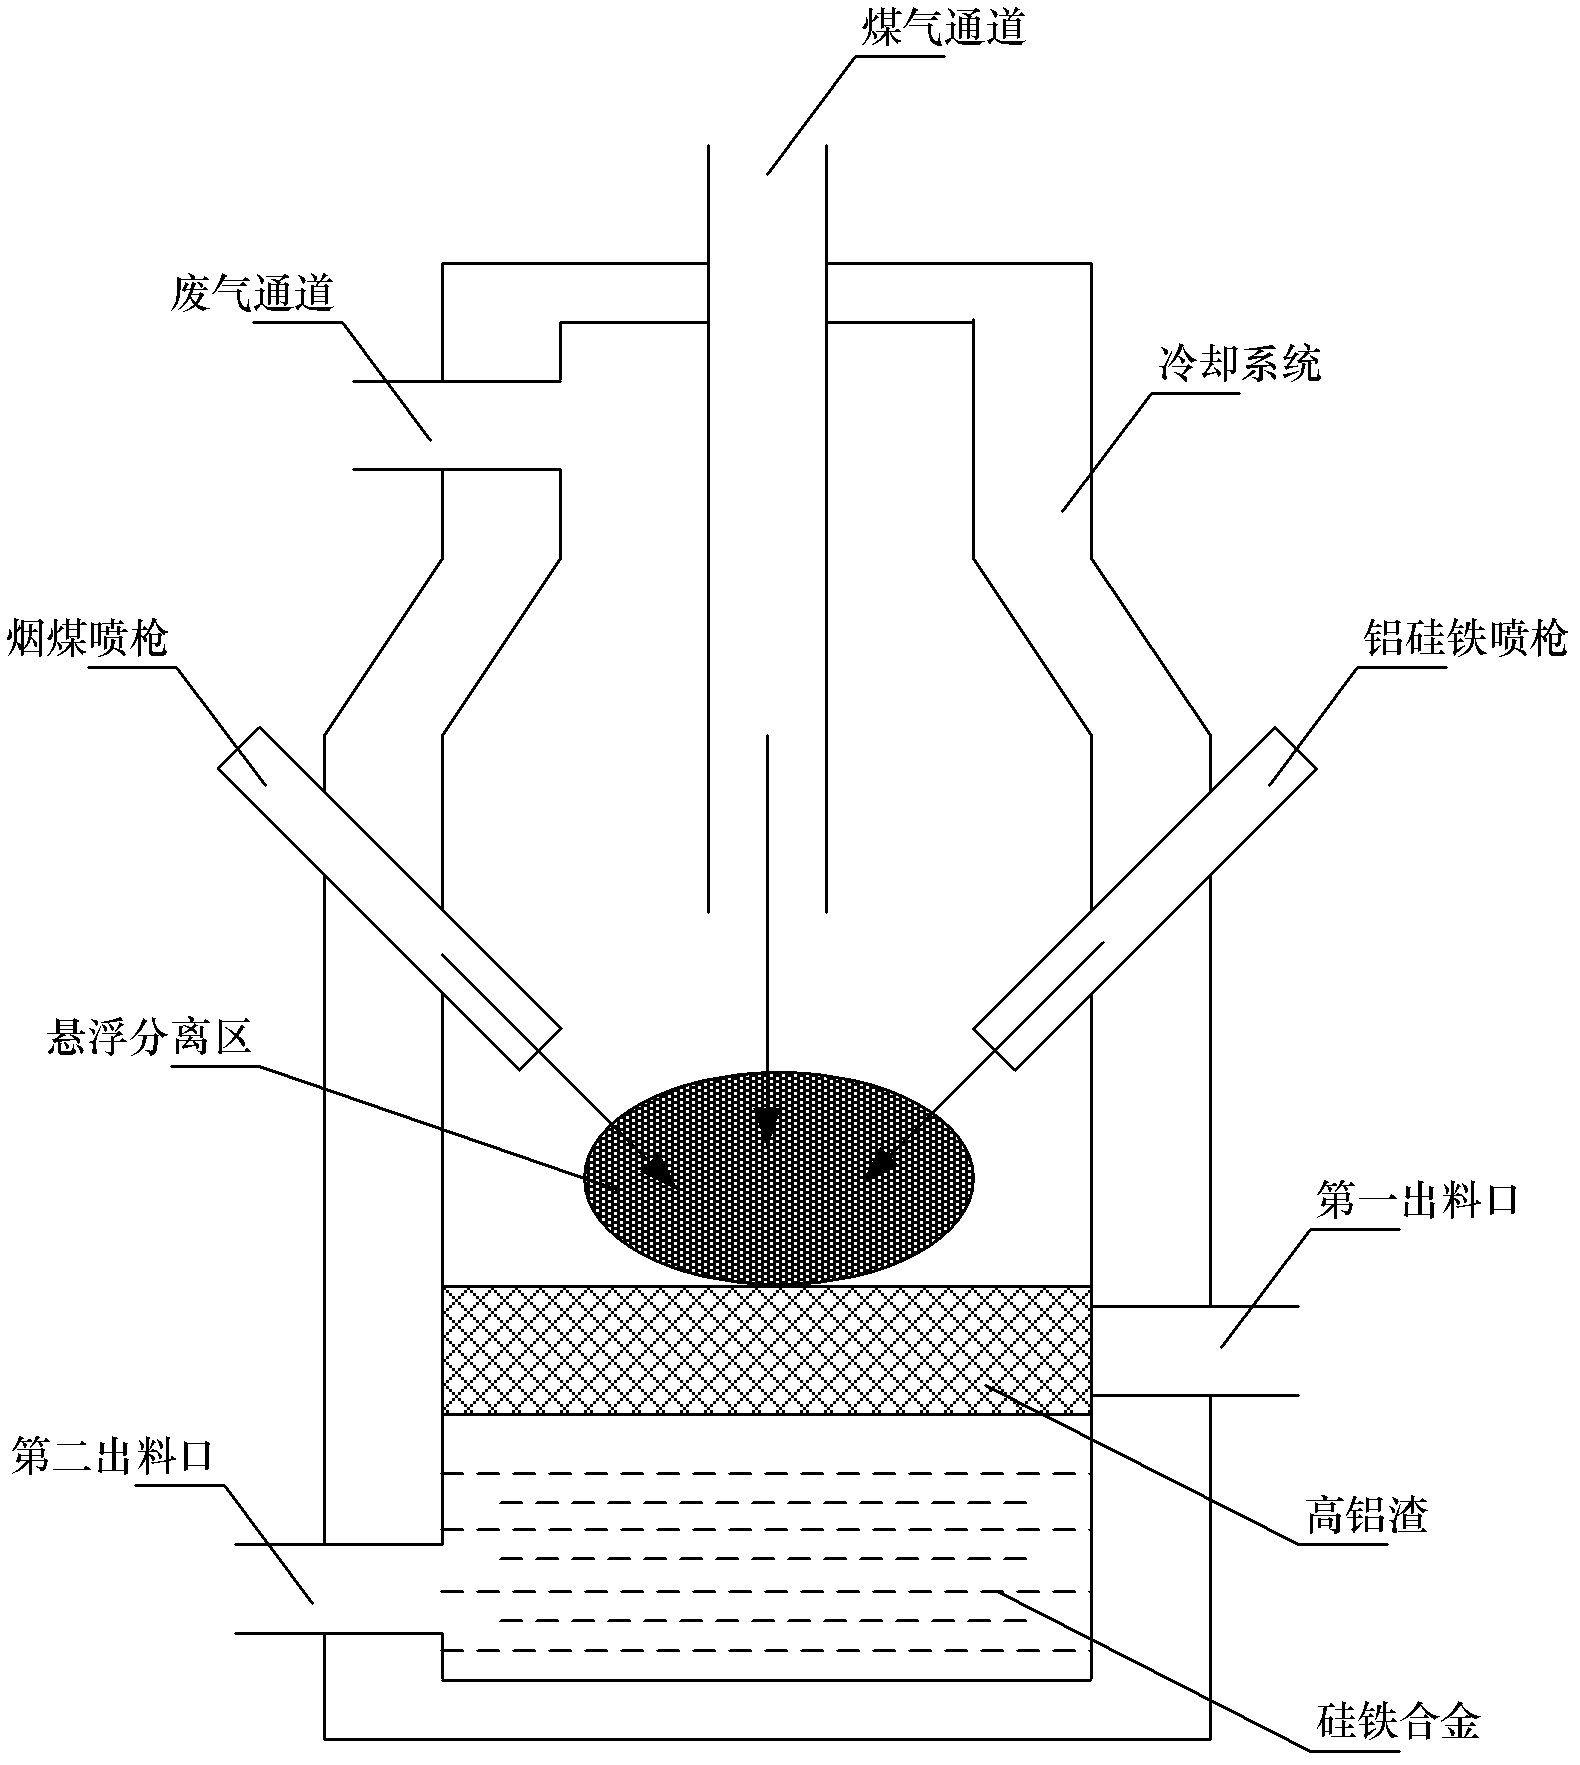 Method for Industrialized Production of Ferrosilicon Alloy by Carbon Reduction from Senustin Mixed Ore